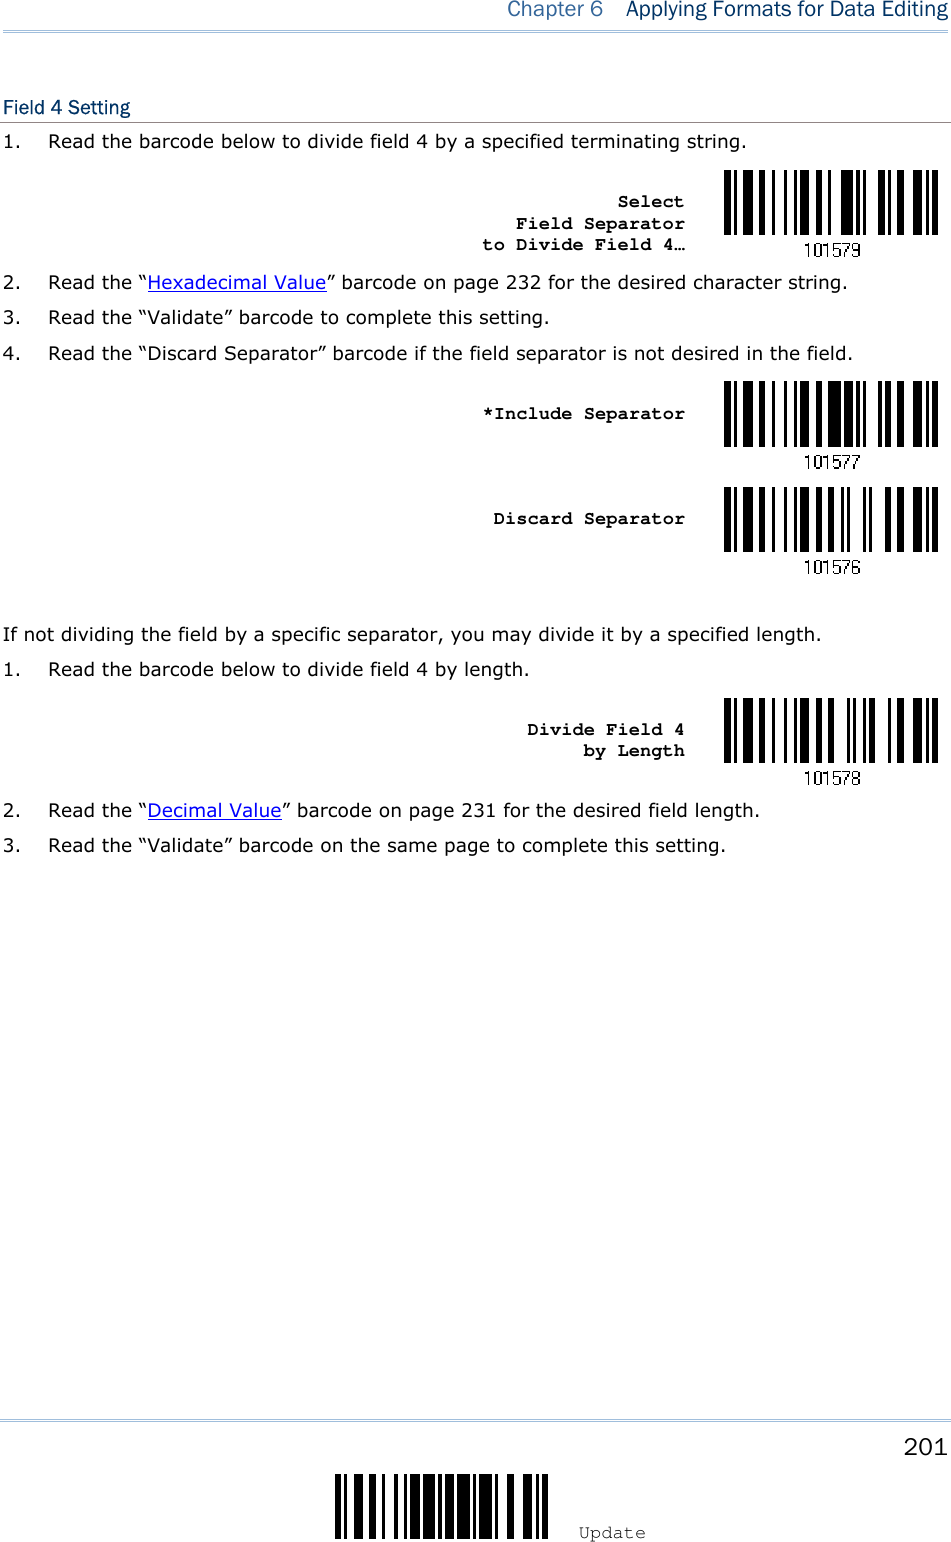    201 Update  Chapter 6   Applying Formats for Data Editing Field 4 Setting 1. Read the barcode below to divide field 4 by a specified terminating string.    Select          Field Separator    to Divide Field 4…  2. Read the “Hexadecimal Value” barcode on page 232 for the desired character string. 3. Read the “Validate” barcode to complete this setting. 4. Read the “Discard Separator” barcode if the field separator is not desired in the field.    *Include Separator     Discard Separator   If not dividing the field by a specific separator, you may divide it by a specified length. 1. Read the barcode below to divide field 4 by length.    Divide Field 4      by Length  2. Read the “Decimal Value” barcode on page 231 for the desired field length. 3. Read the “Validate” barcode on the same page to complete this setting.                   